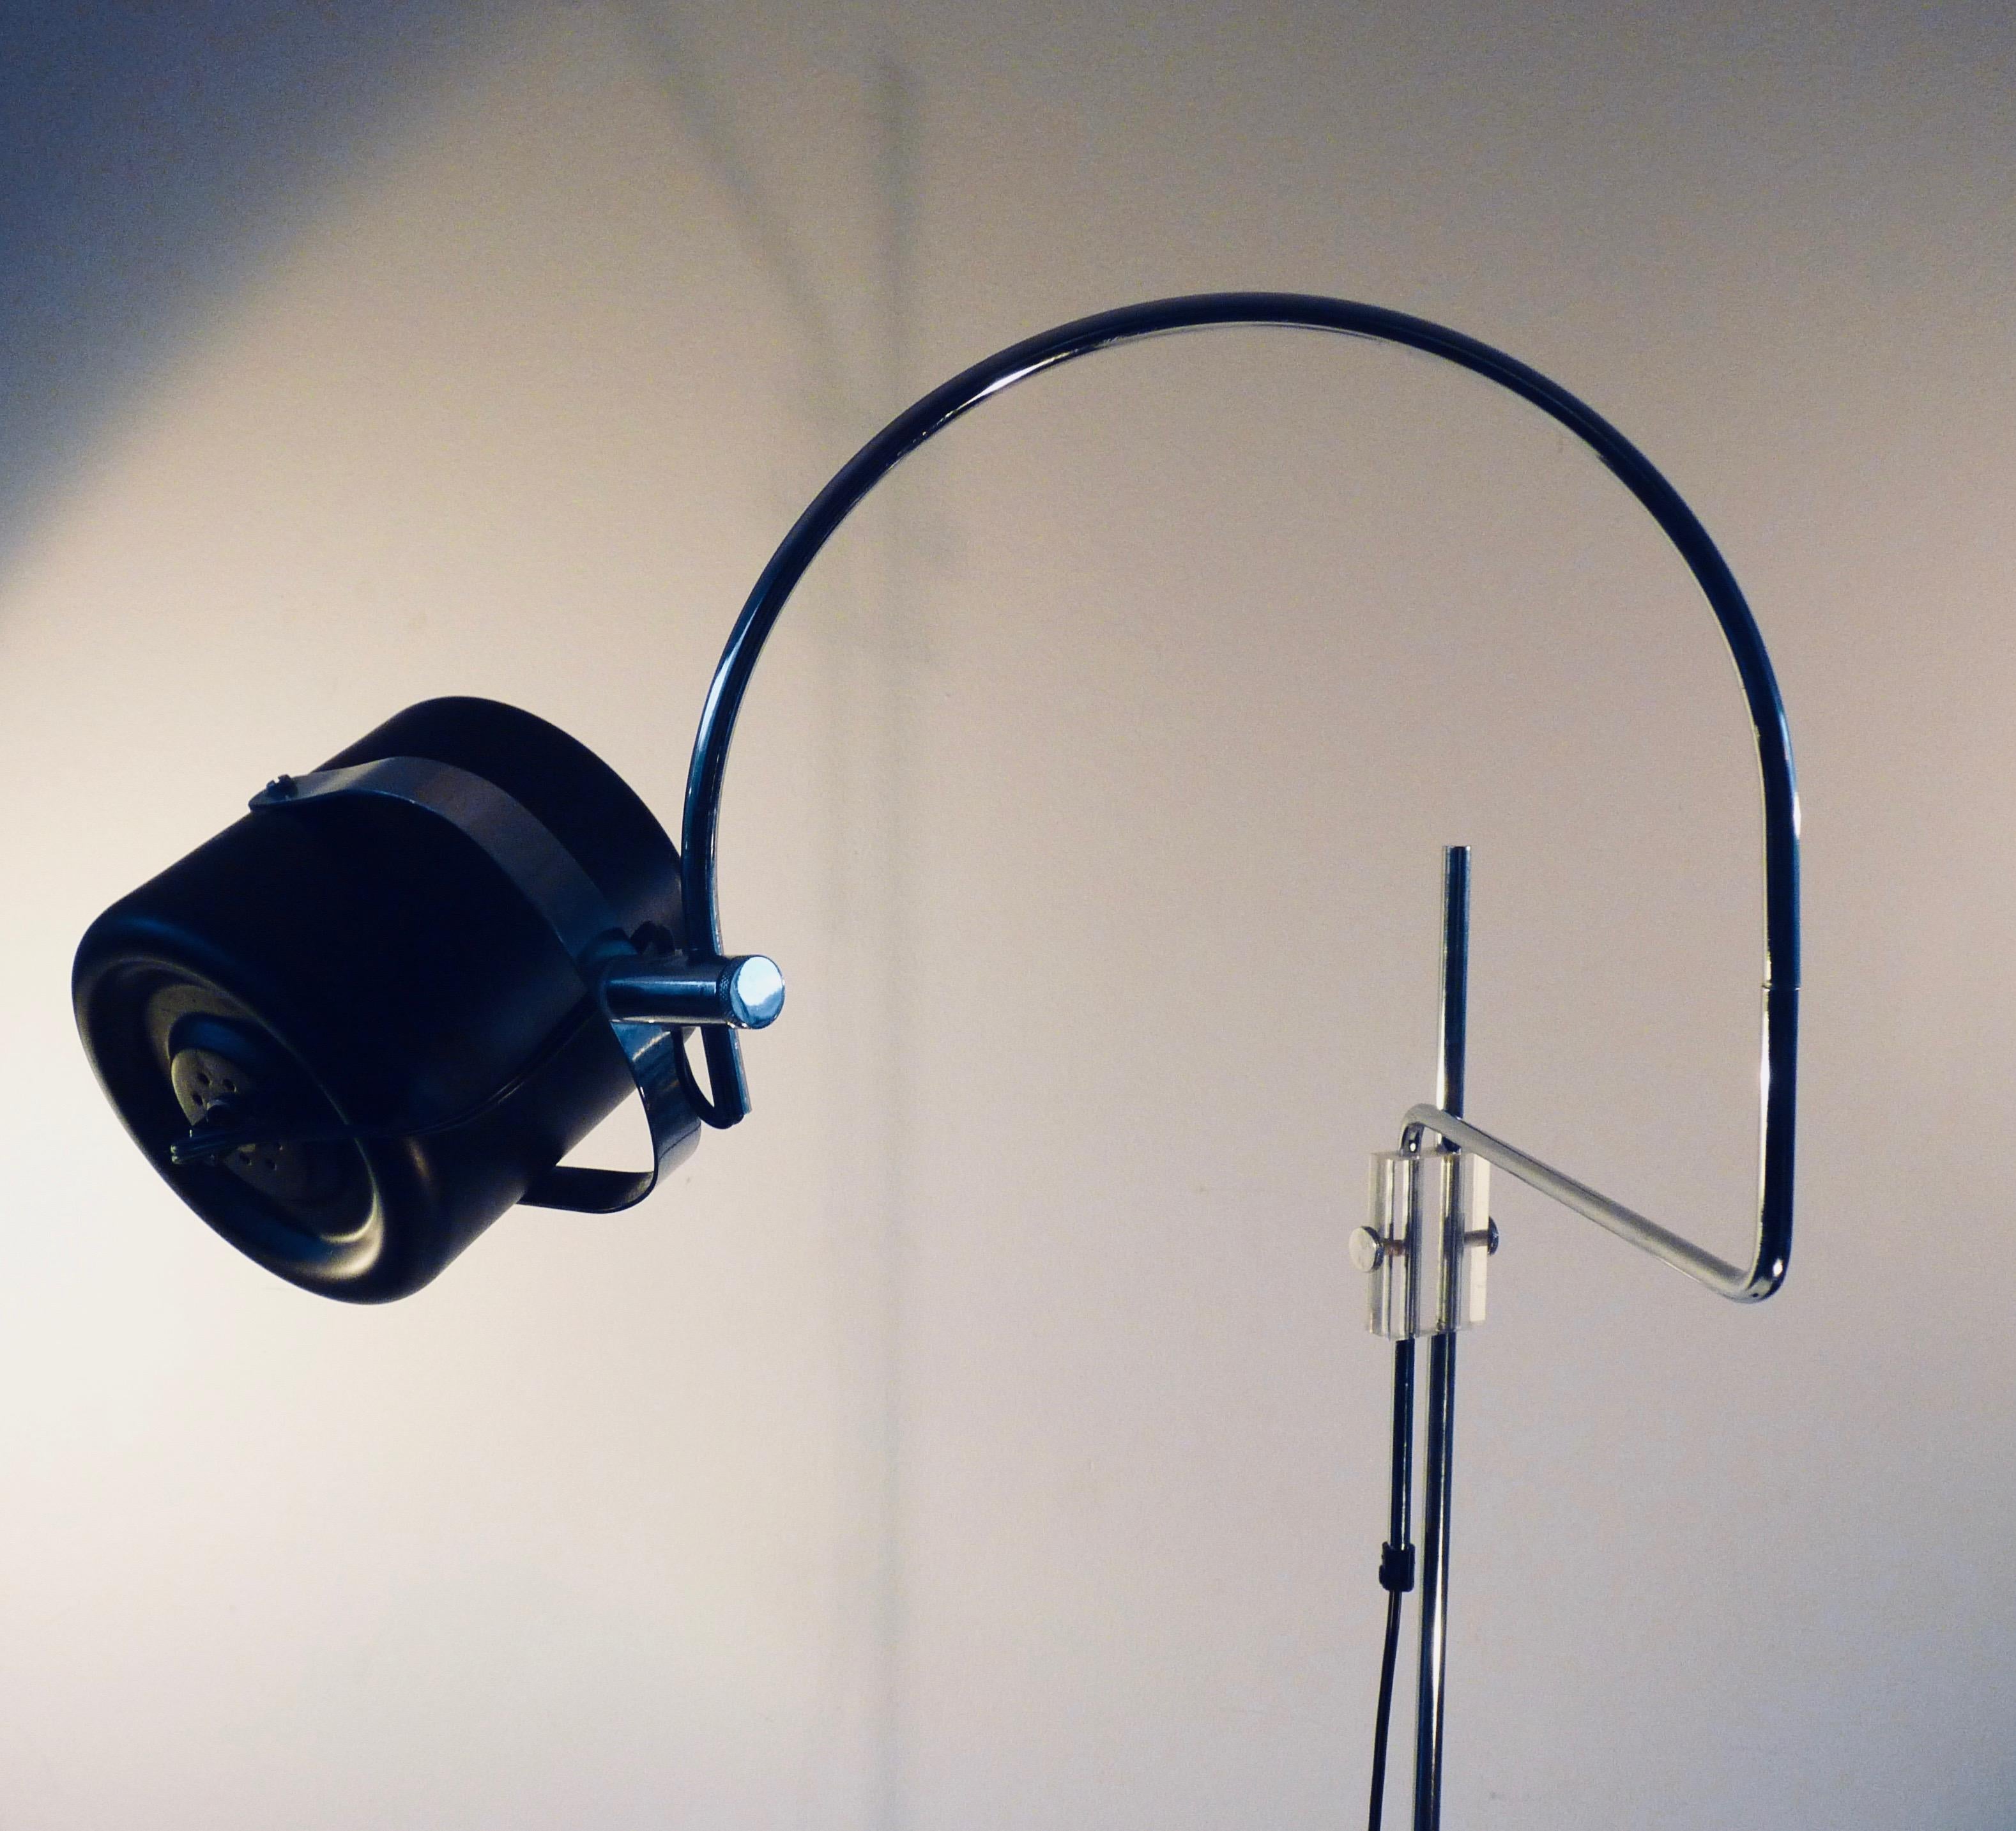 A sculptural elbow arc floor lamp by one of the most respected Dutch lighting Designers of the era J.J.M. Hoogervorst, head designer of ANVIA, Holland. 
Many lamps designed by J.J.M. Hoogervorst are iconic designs, timeslessly, functional Dutch